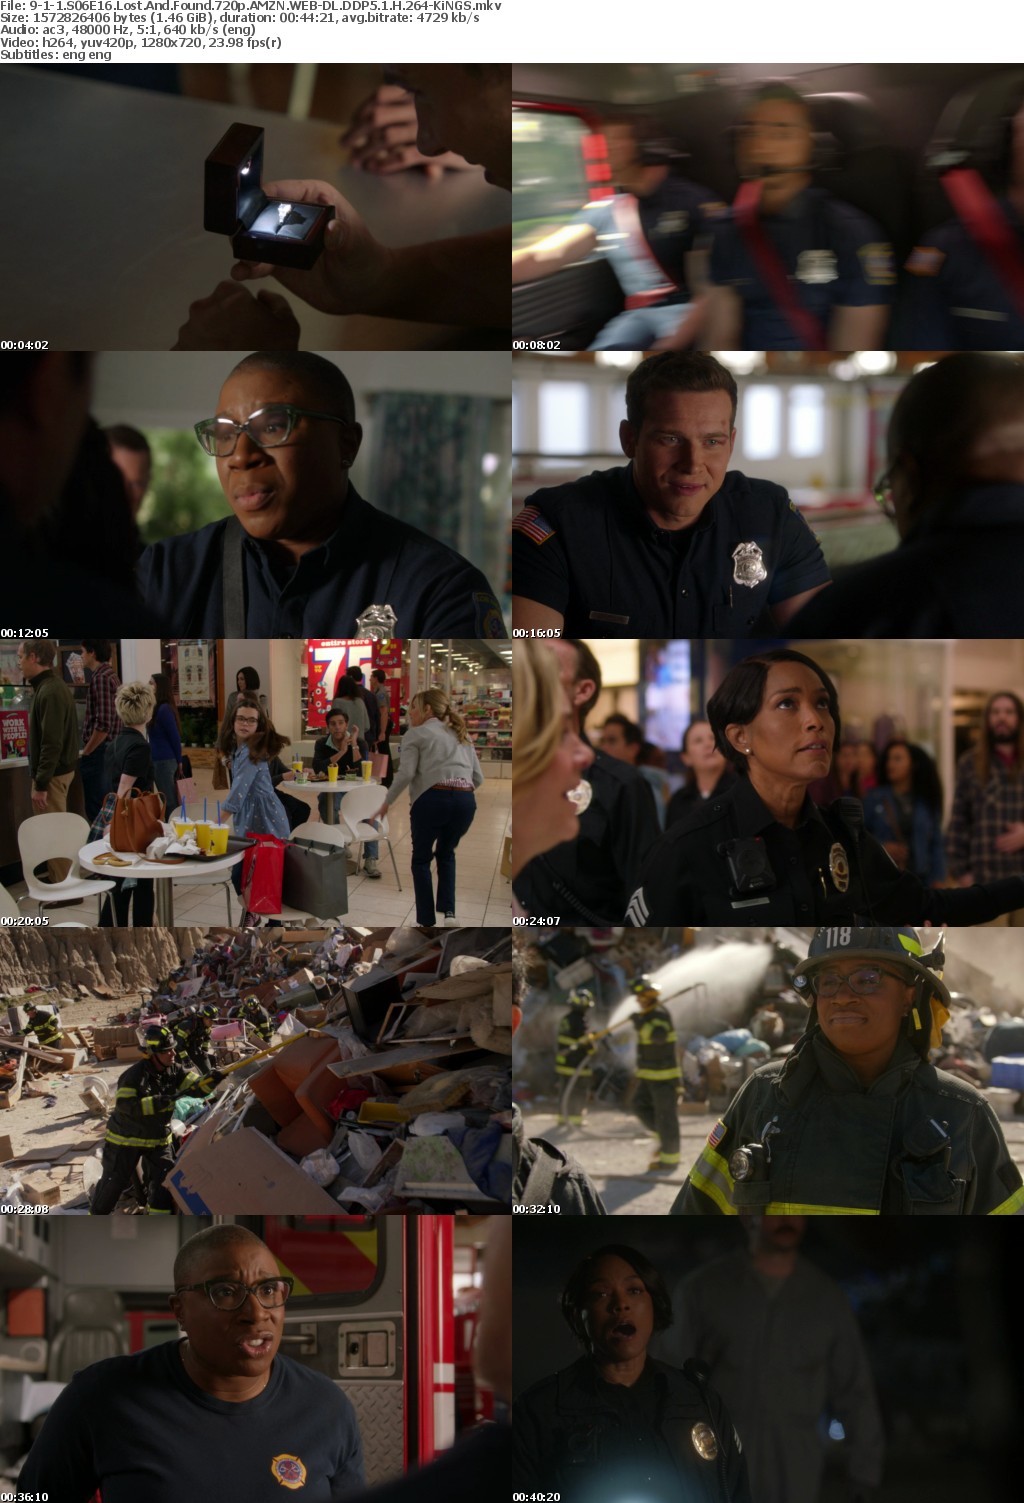 9-1-1 S06E16 Lost And Found 720p AMZN WEBRip DDP5 1 x264-KiNGS